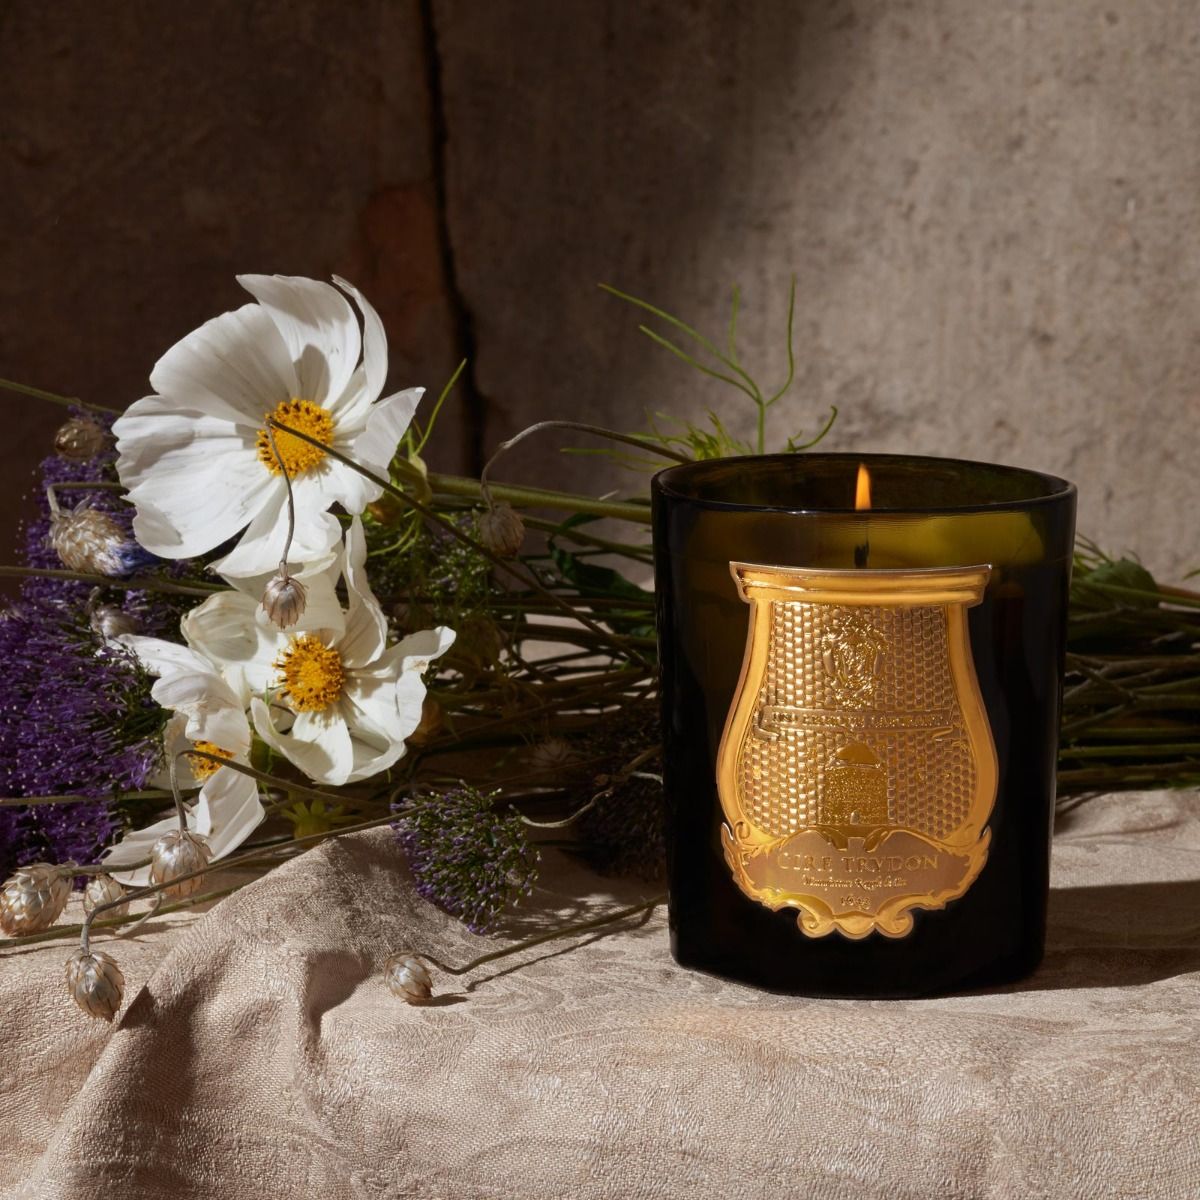 Trudon - Madeline (Floral Leather) Candle